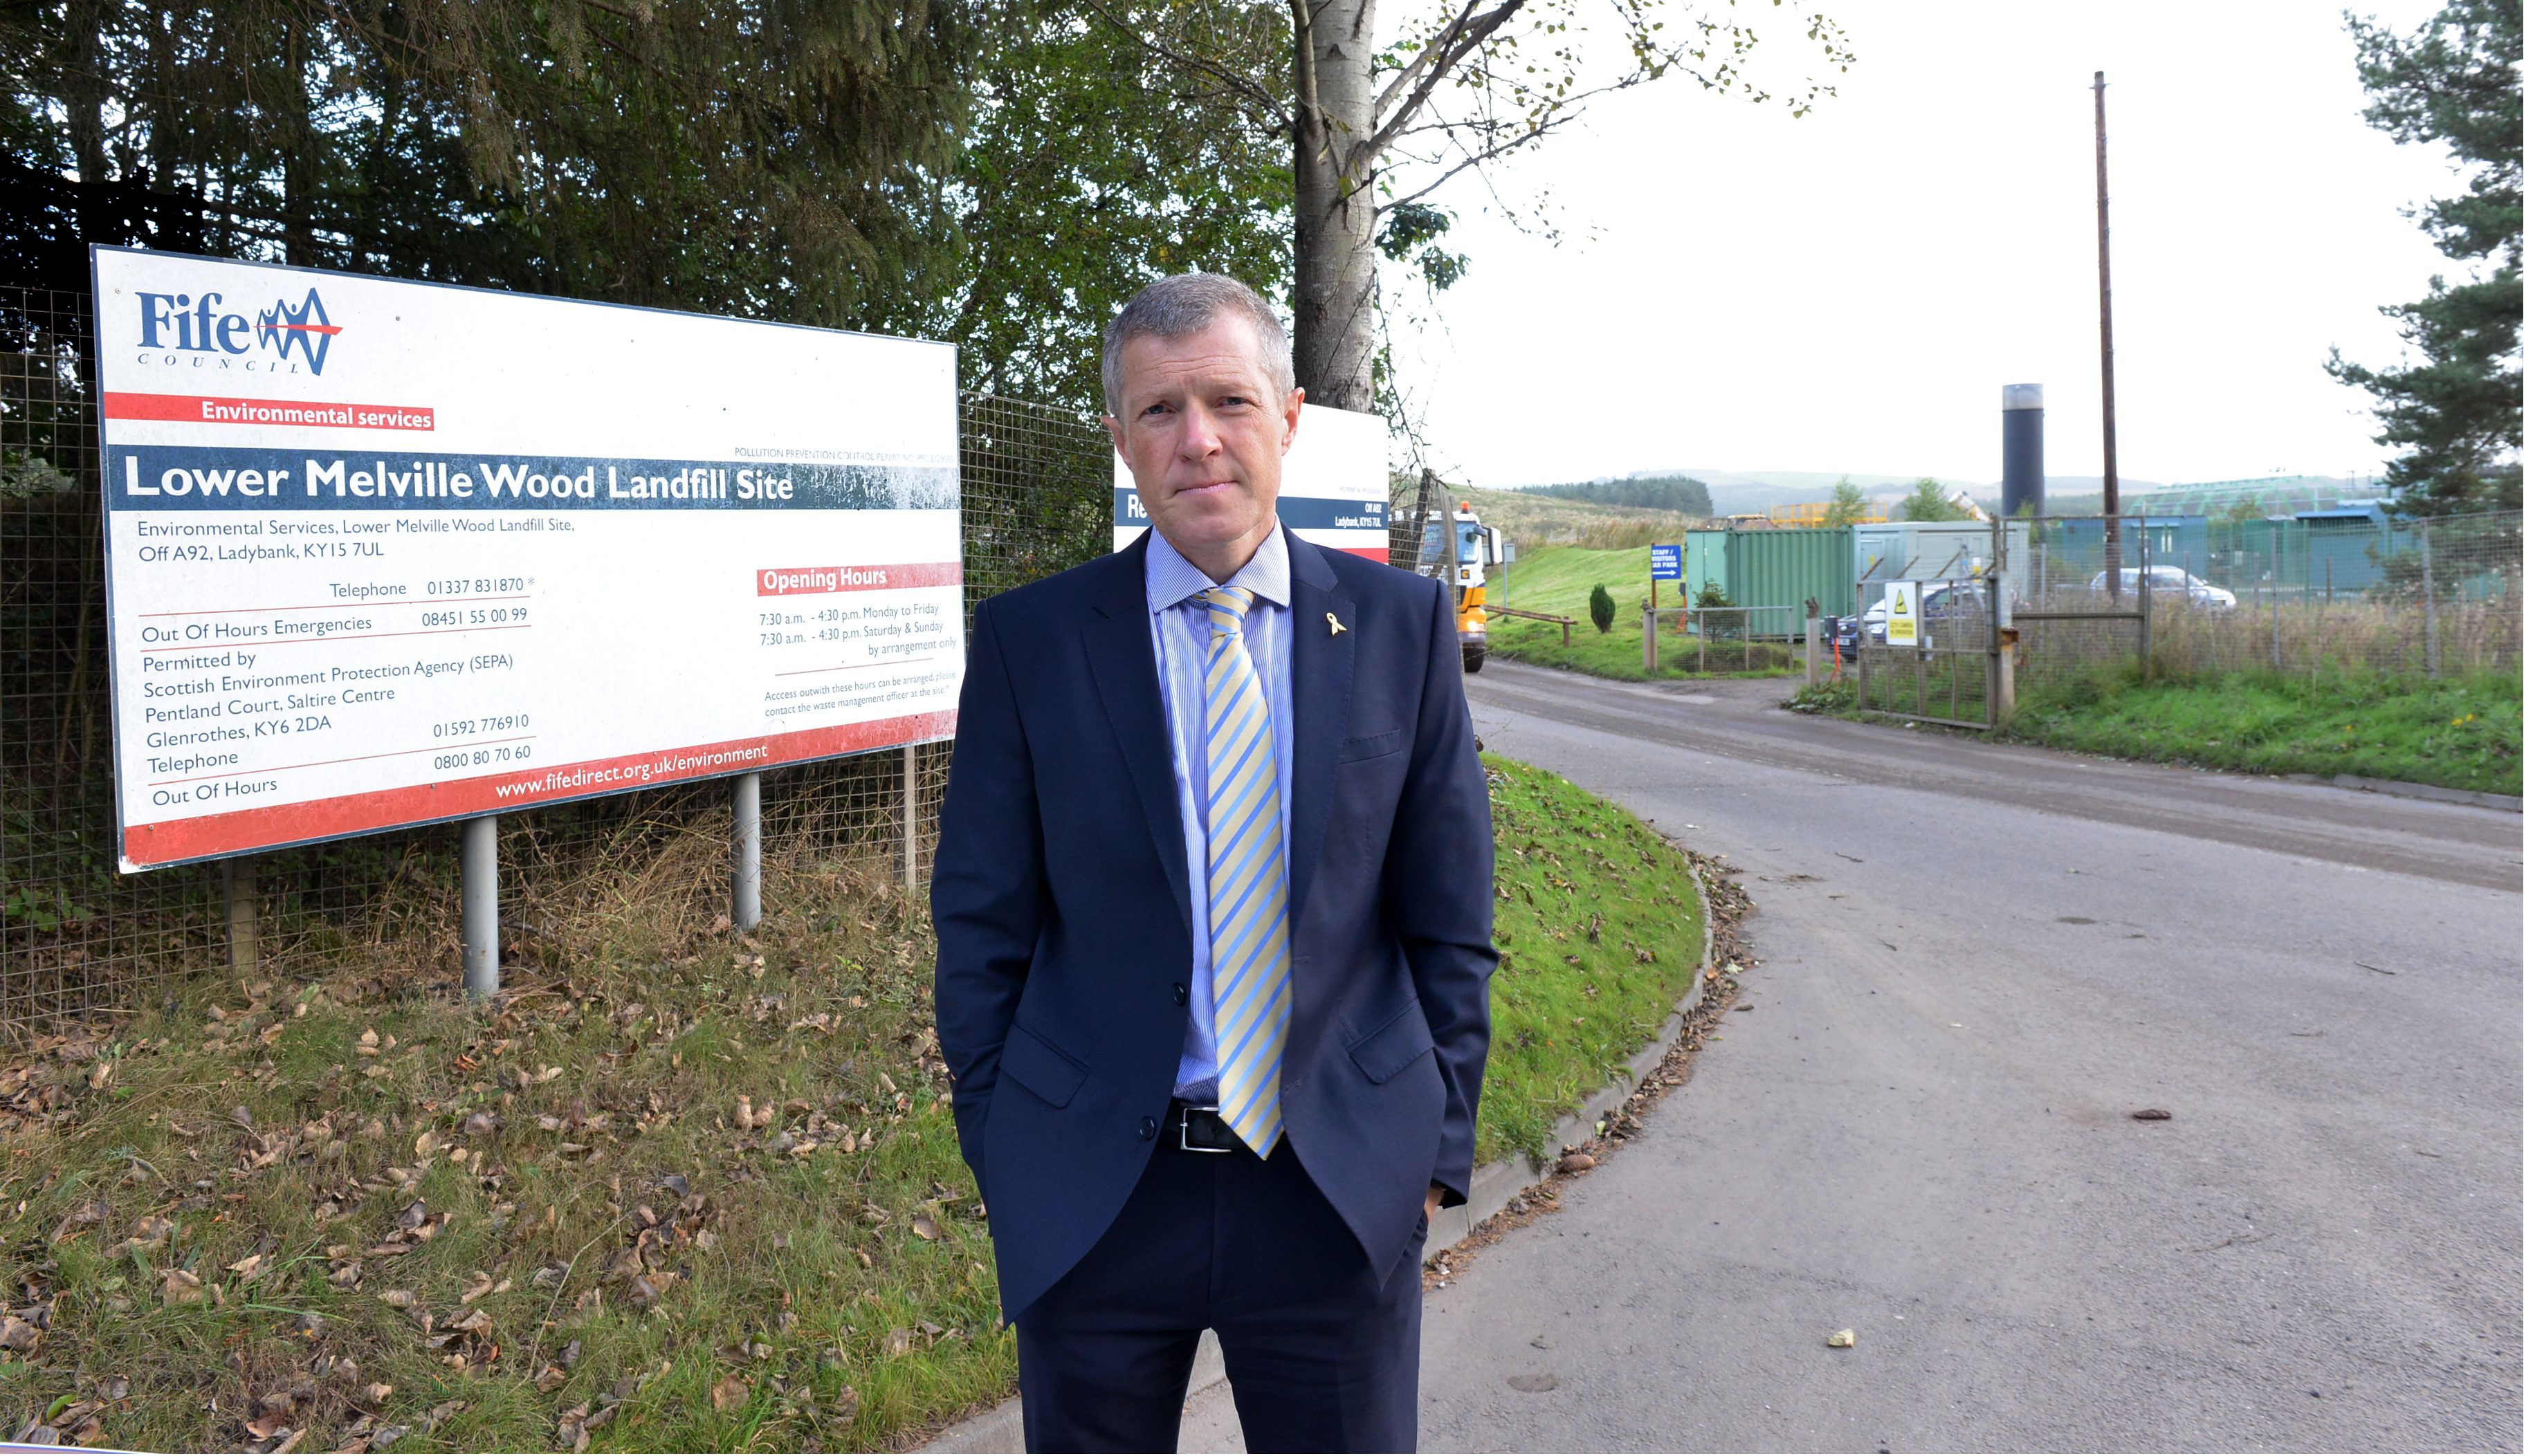 Willie Rennie MSP recently took up residents’ concerns about odour problems coming from the Lower Melville Wood landfill site.